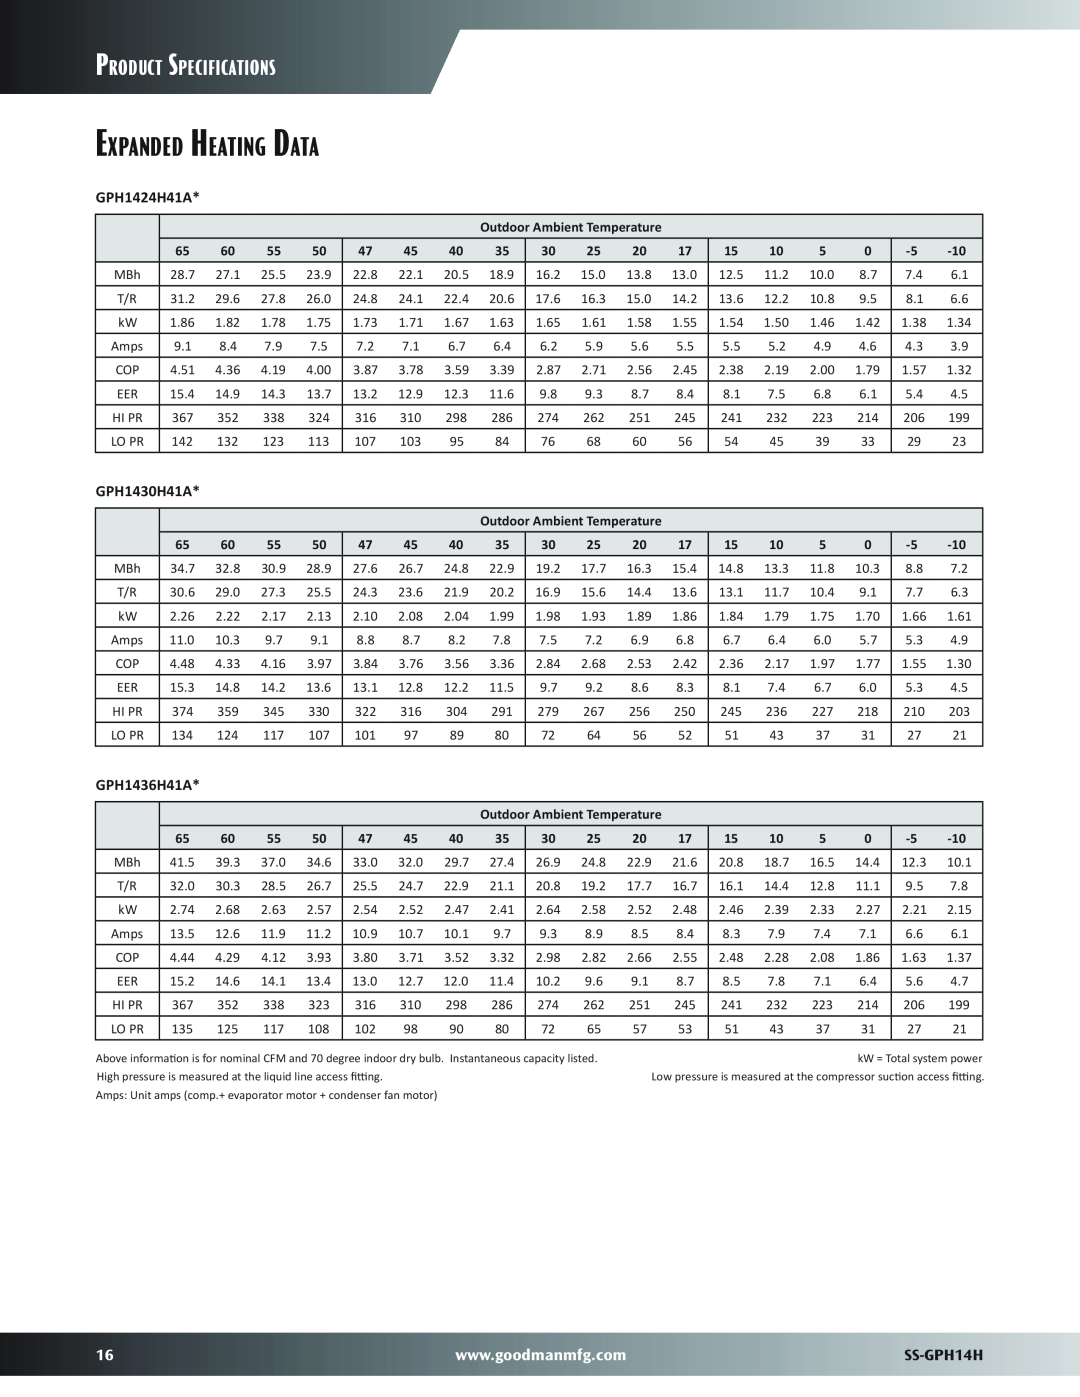 Goodman Mfg dimensions Expanded Heating Data, Product Specifications, SS-GPH14H 